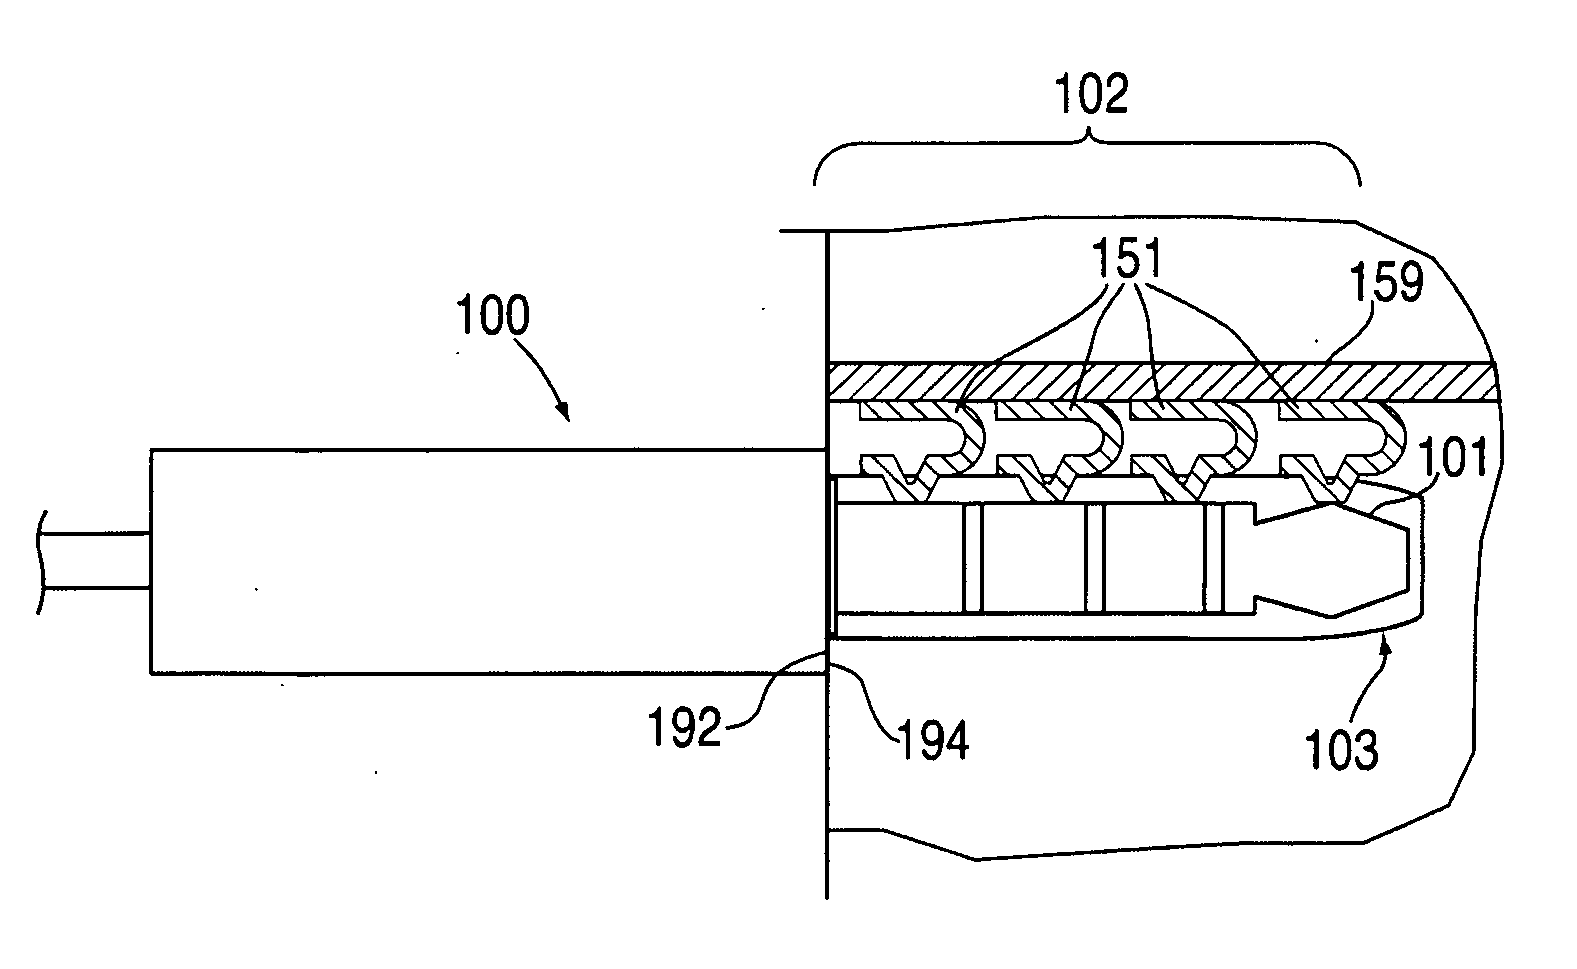 Audio plug with core structural member